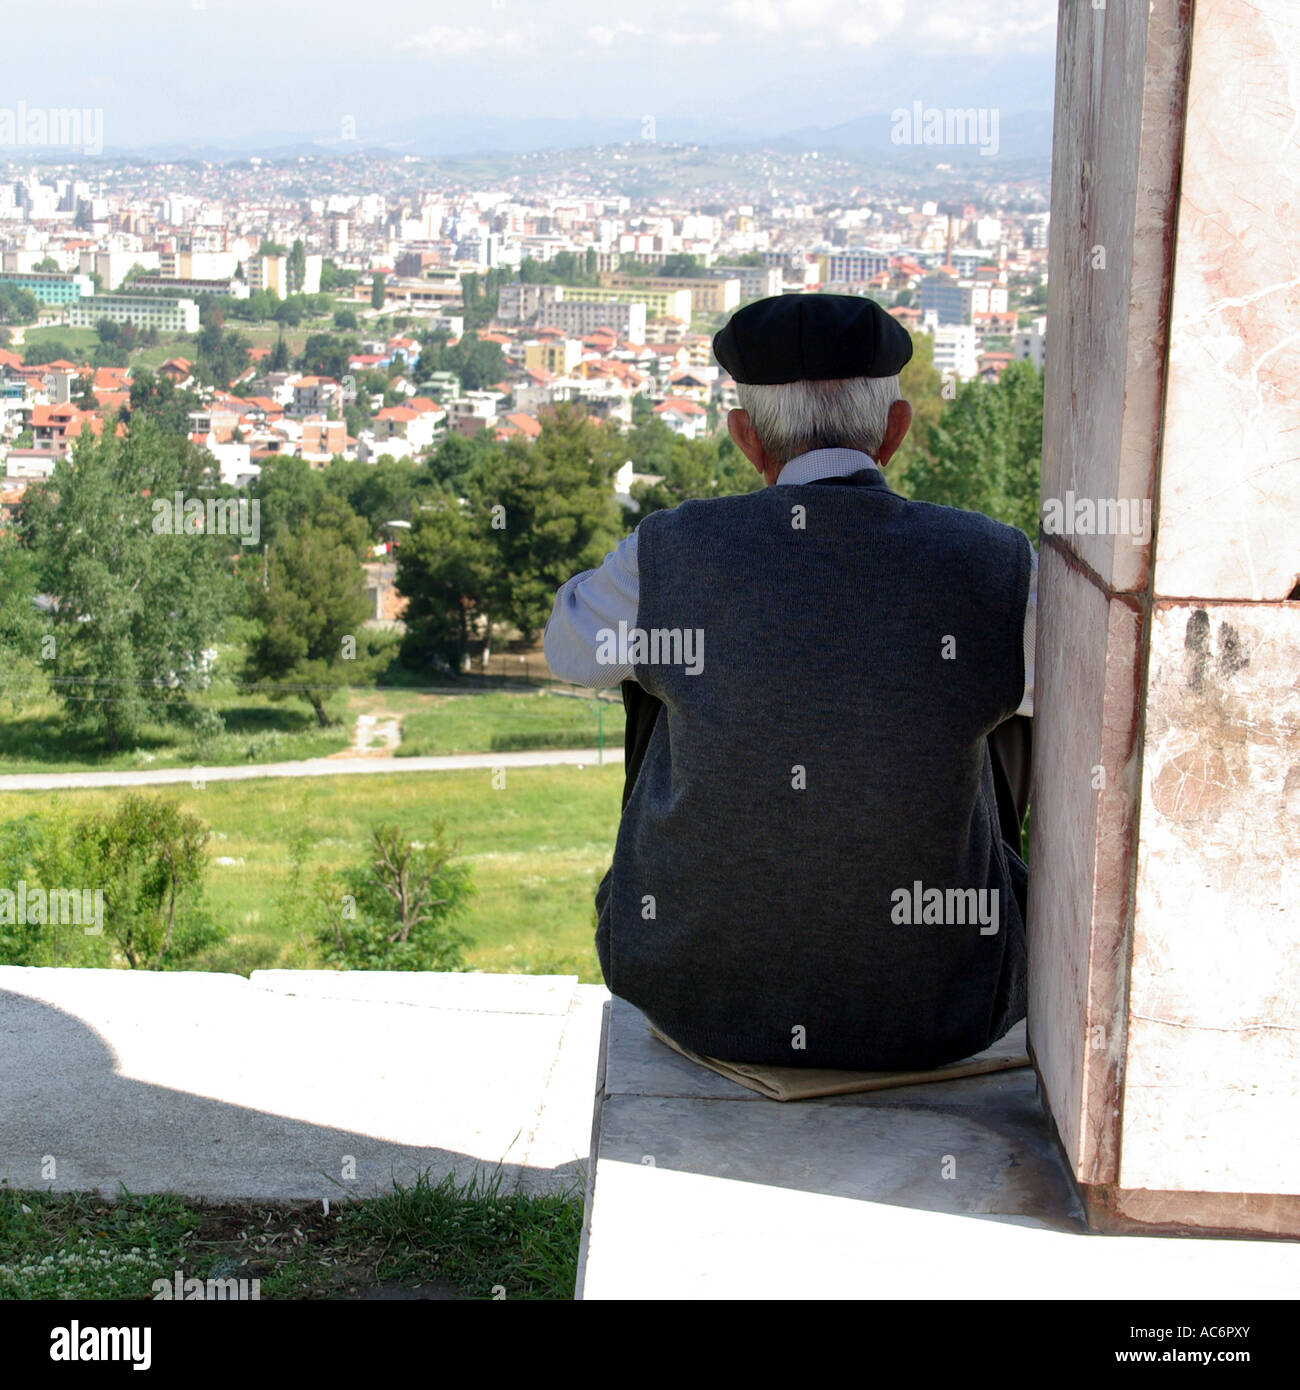 City of Tirana in Republic of Albania sprawls out below an old man sitting on wall overlooking the urban landscape from hillside in formal parkland Stock Photo